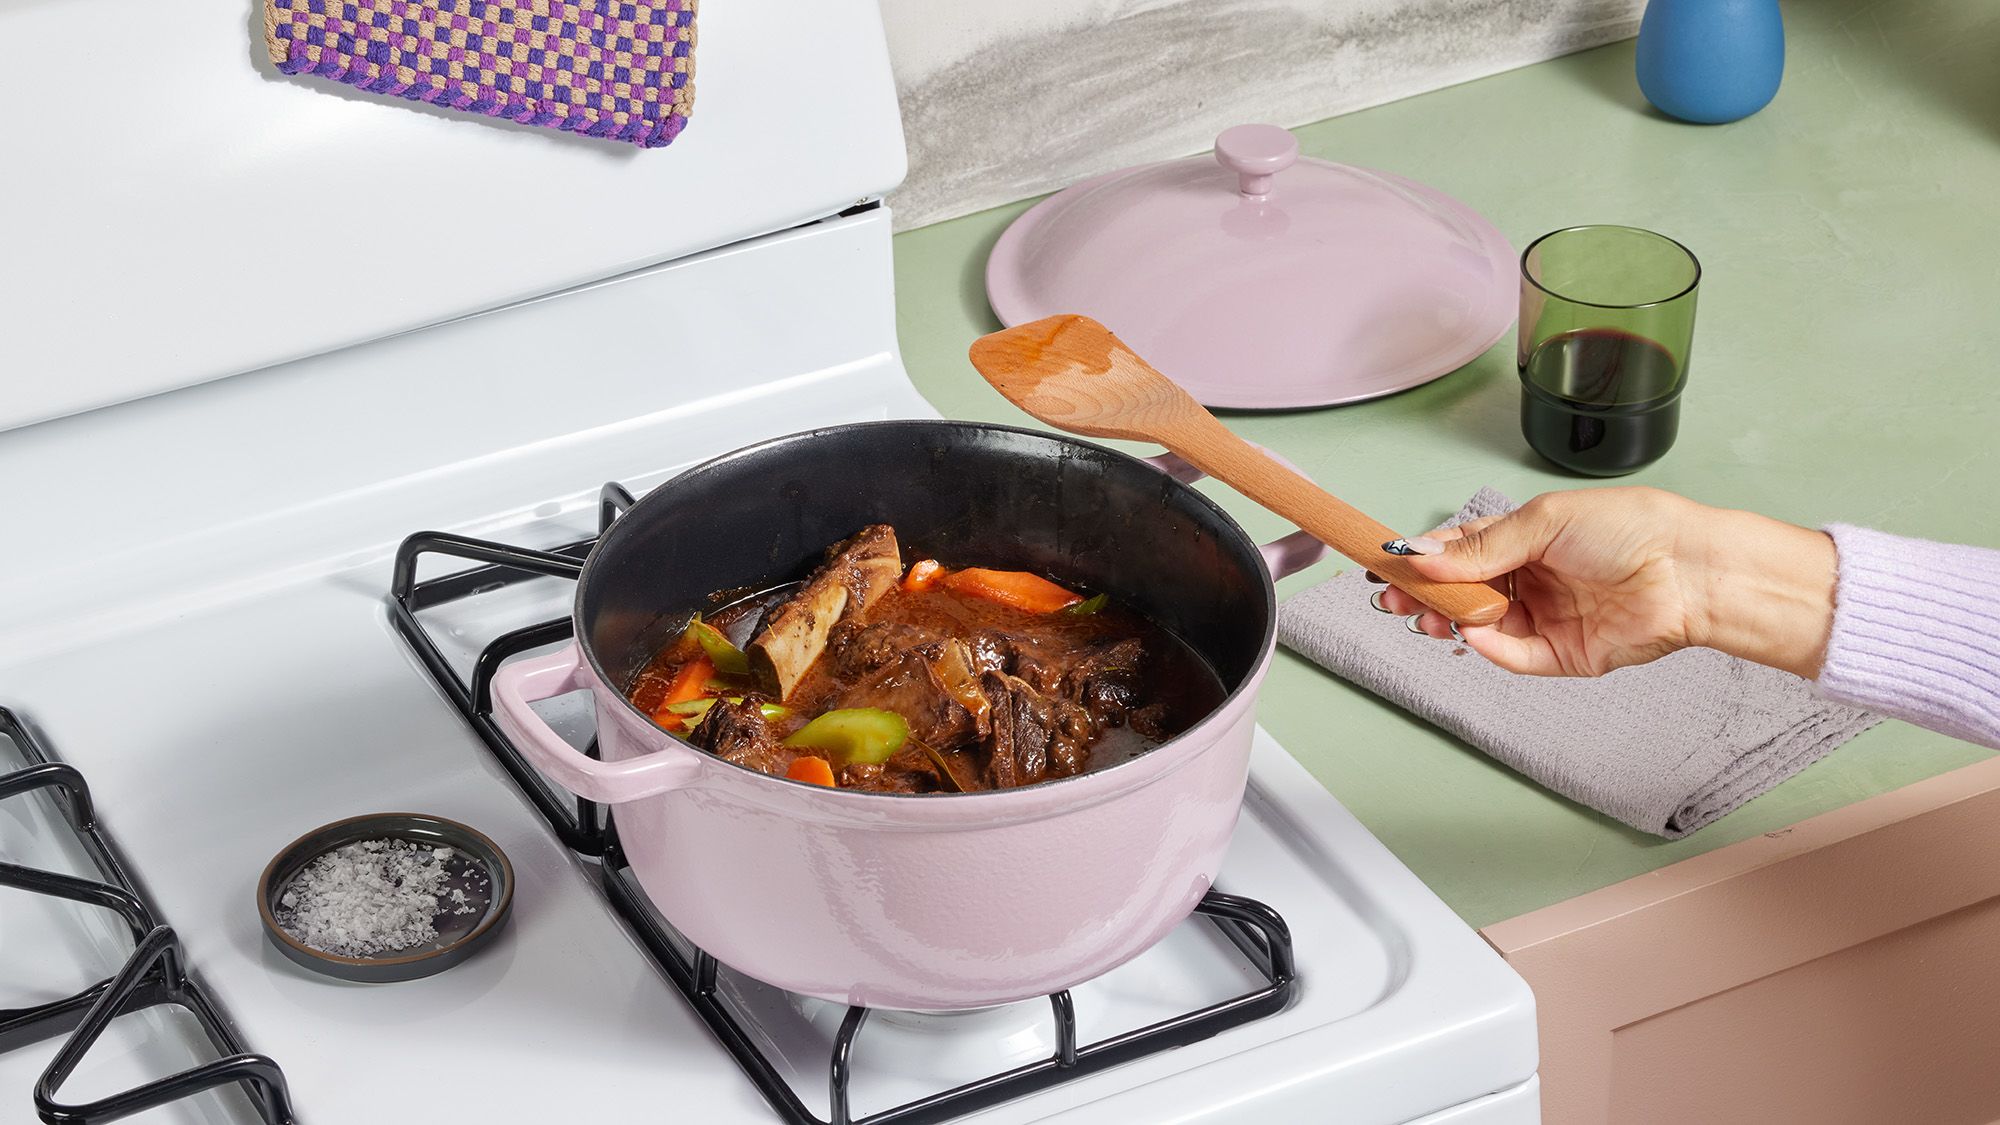 Our Place Just Released Miniature Versions of Its Always Pan and Perfect Pot